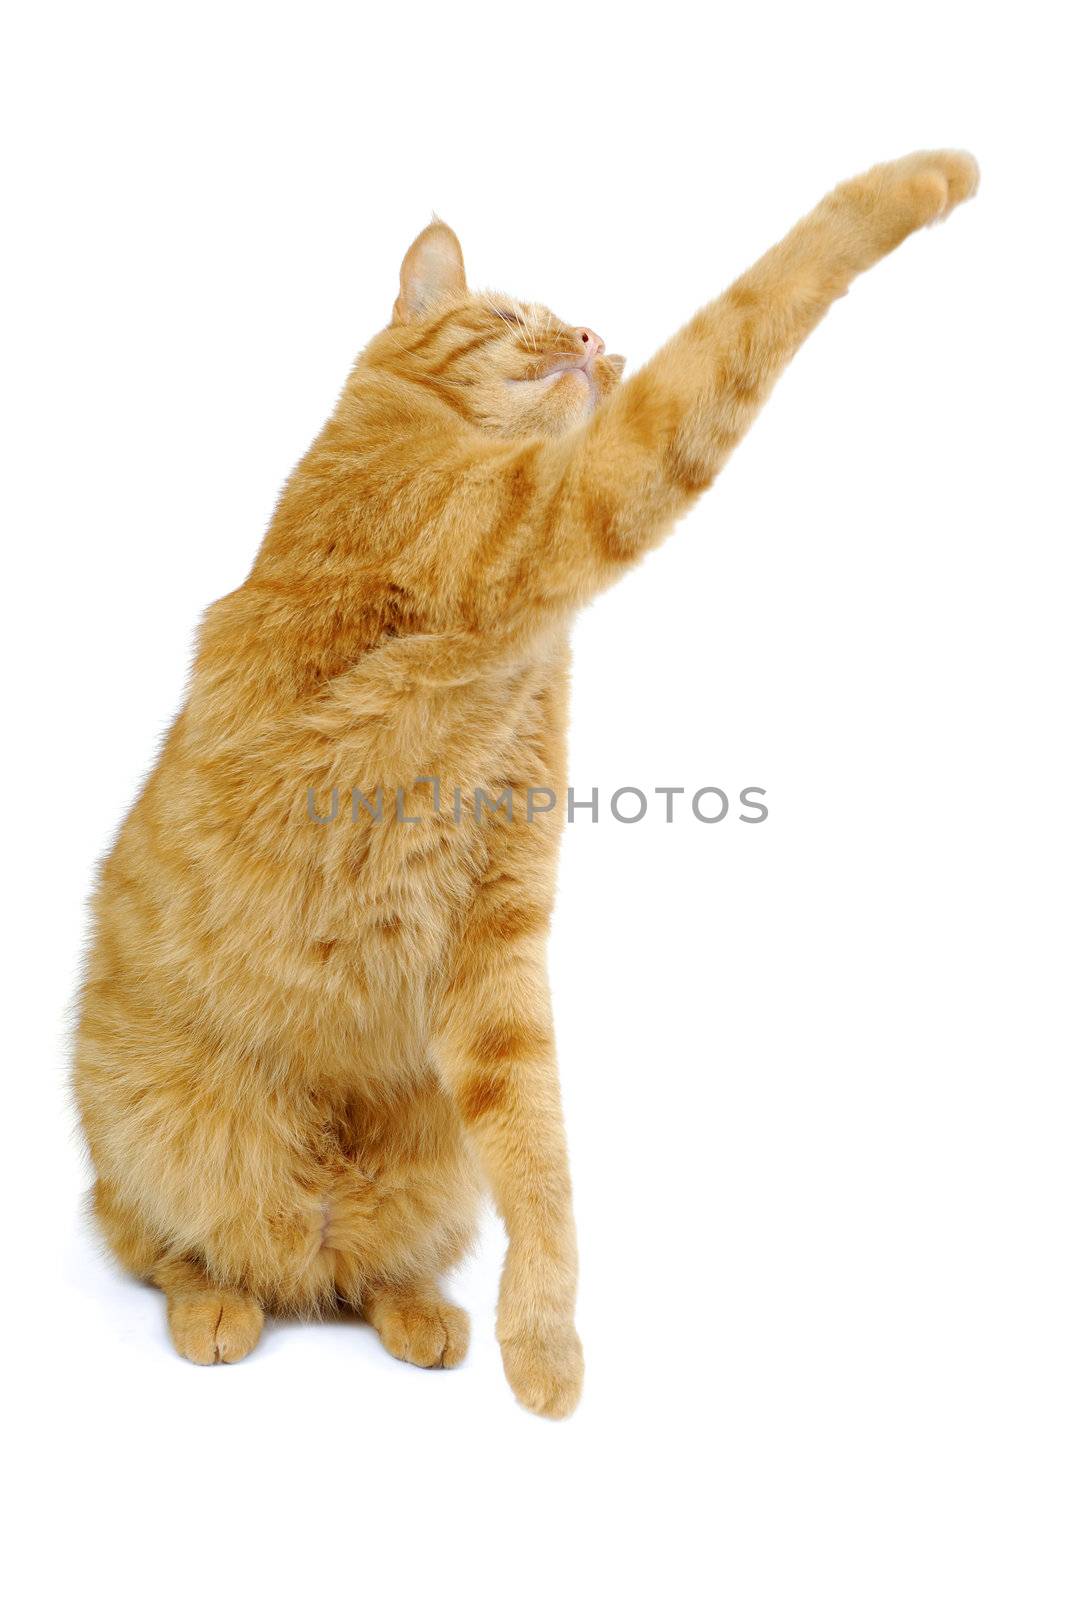 Cat on a clean white background